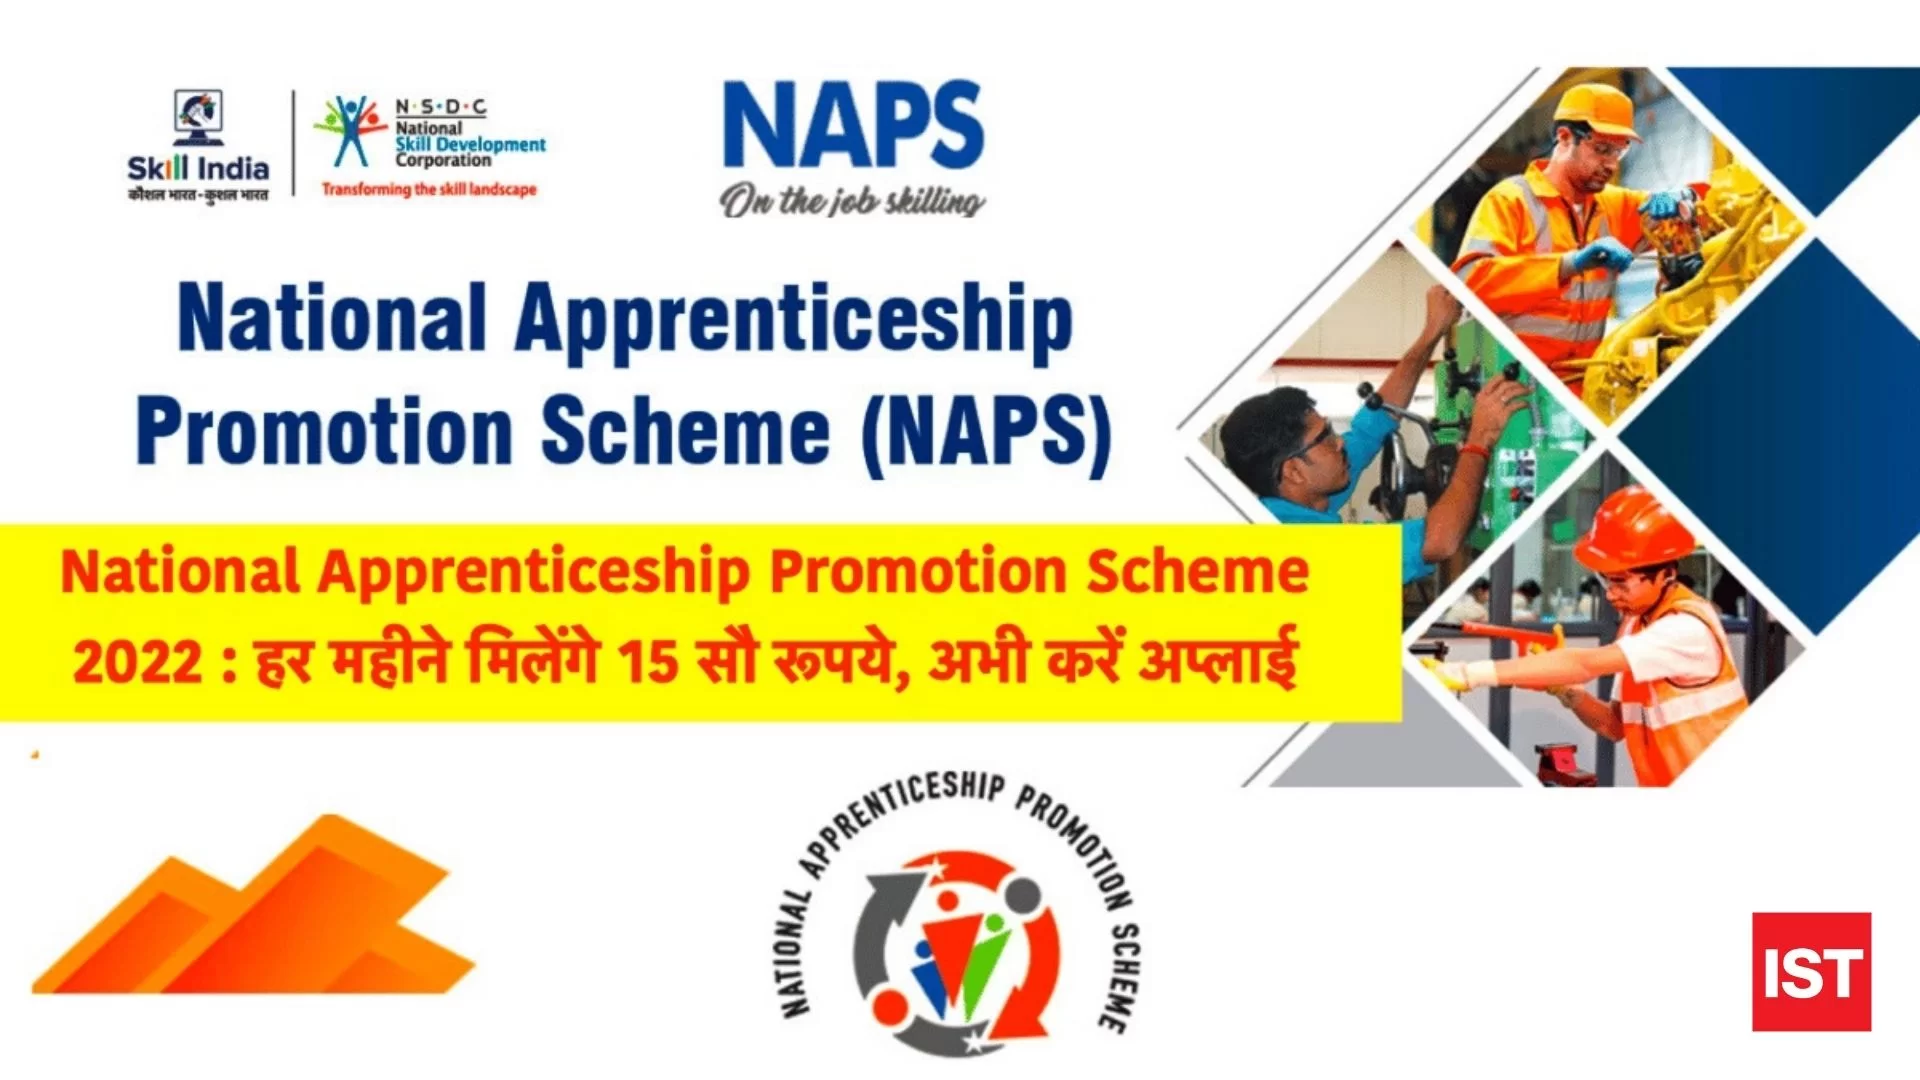 India's National Apprenticeship Promotion Scheme Fuels Inclusive Growth